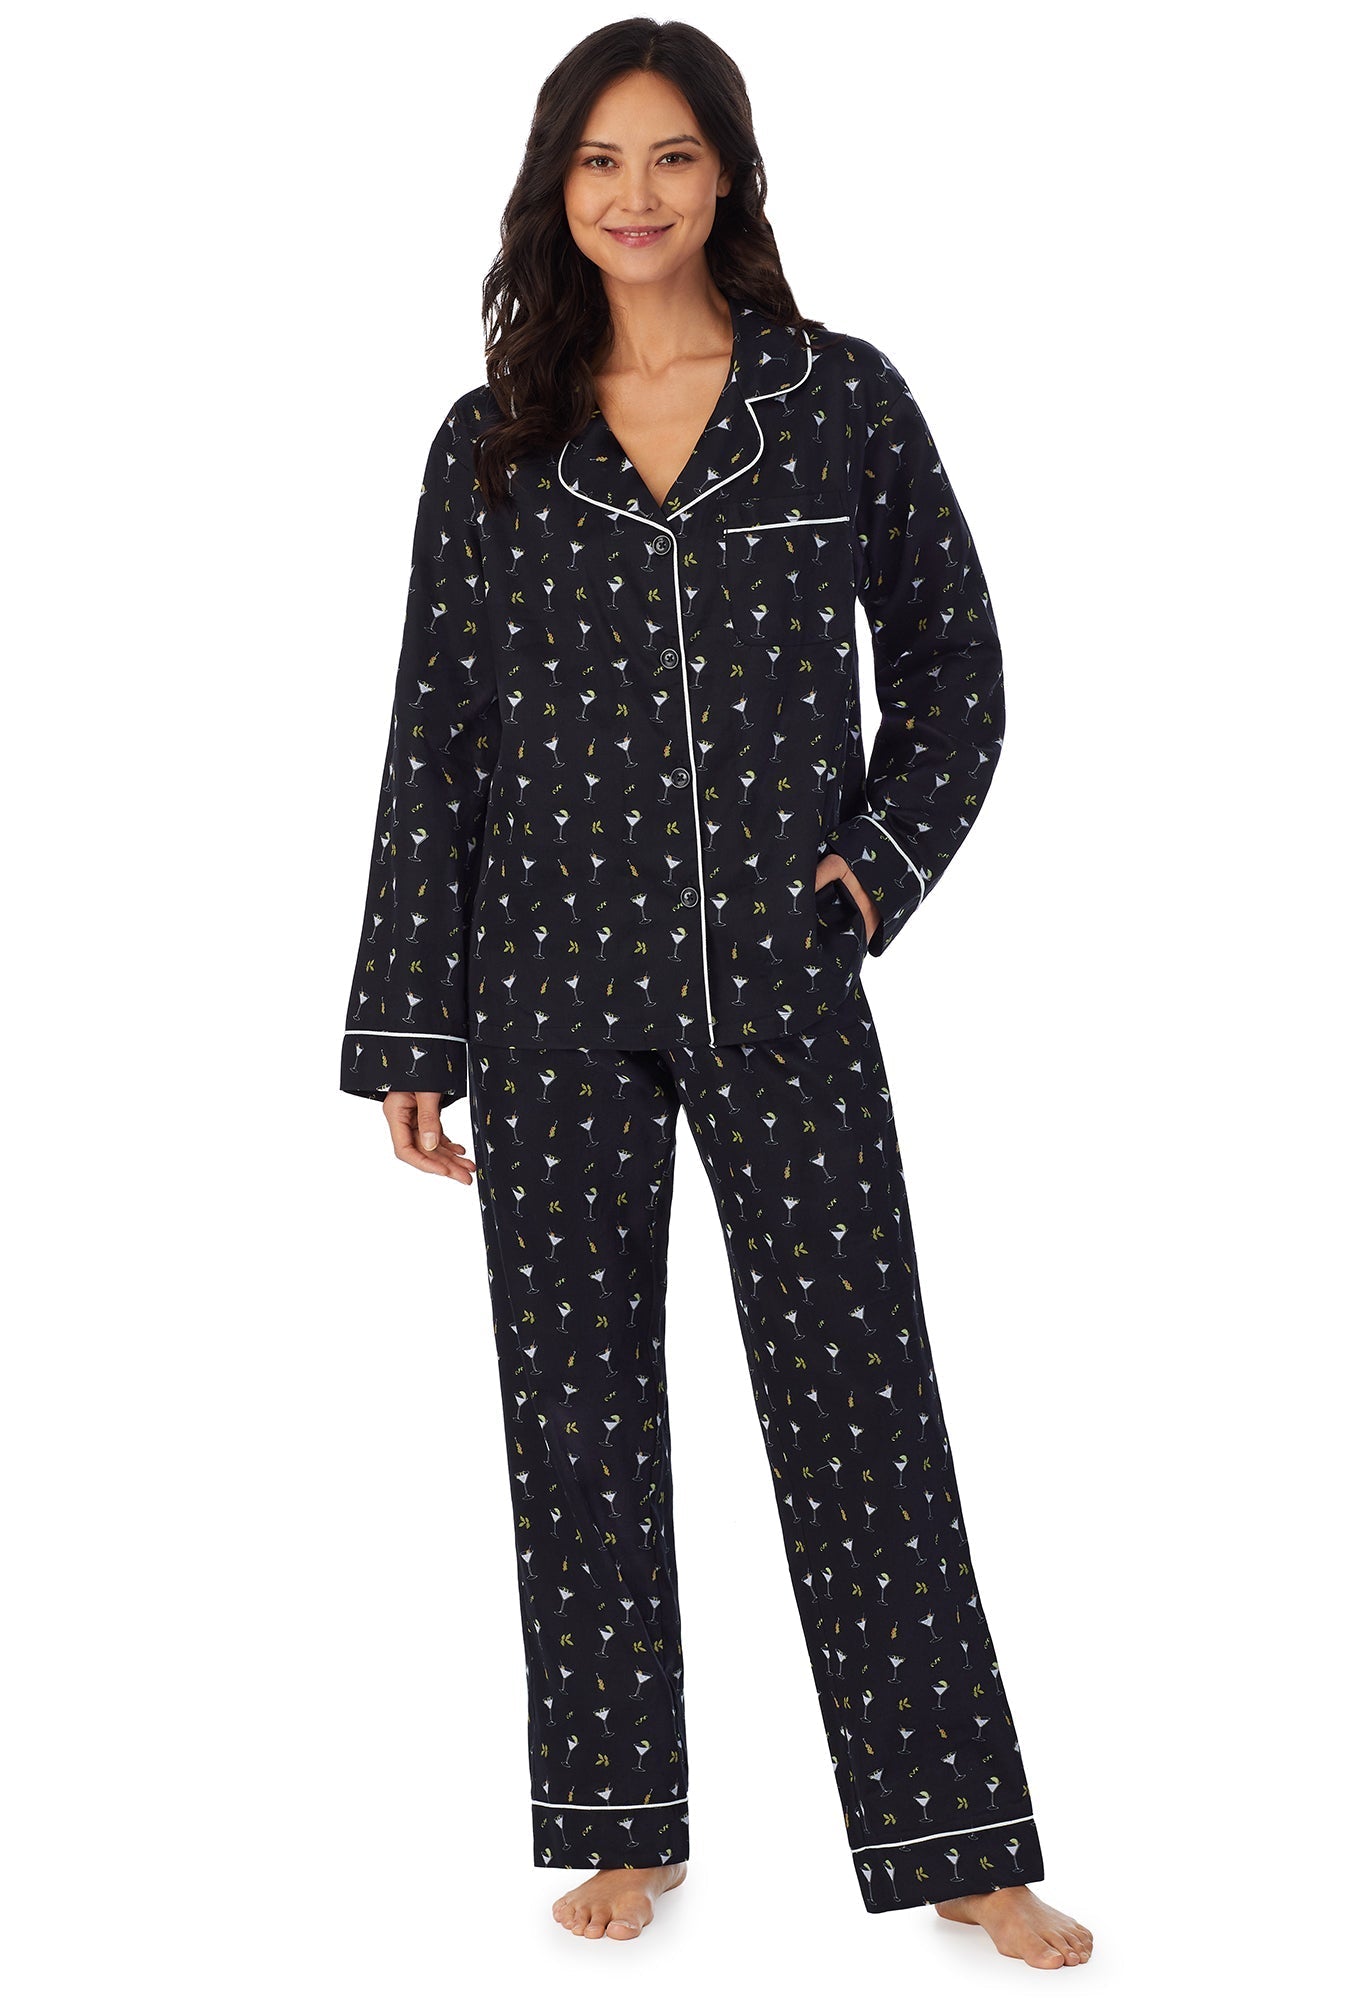 A lady wearing a black long sleeve pj set with tipsy martini pattern.